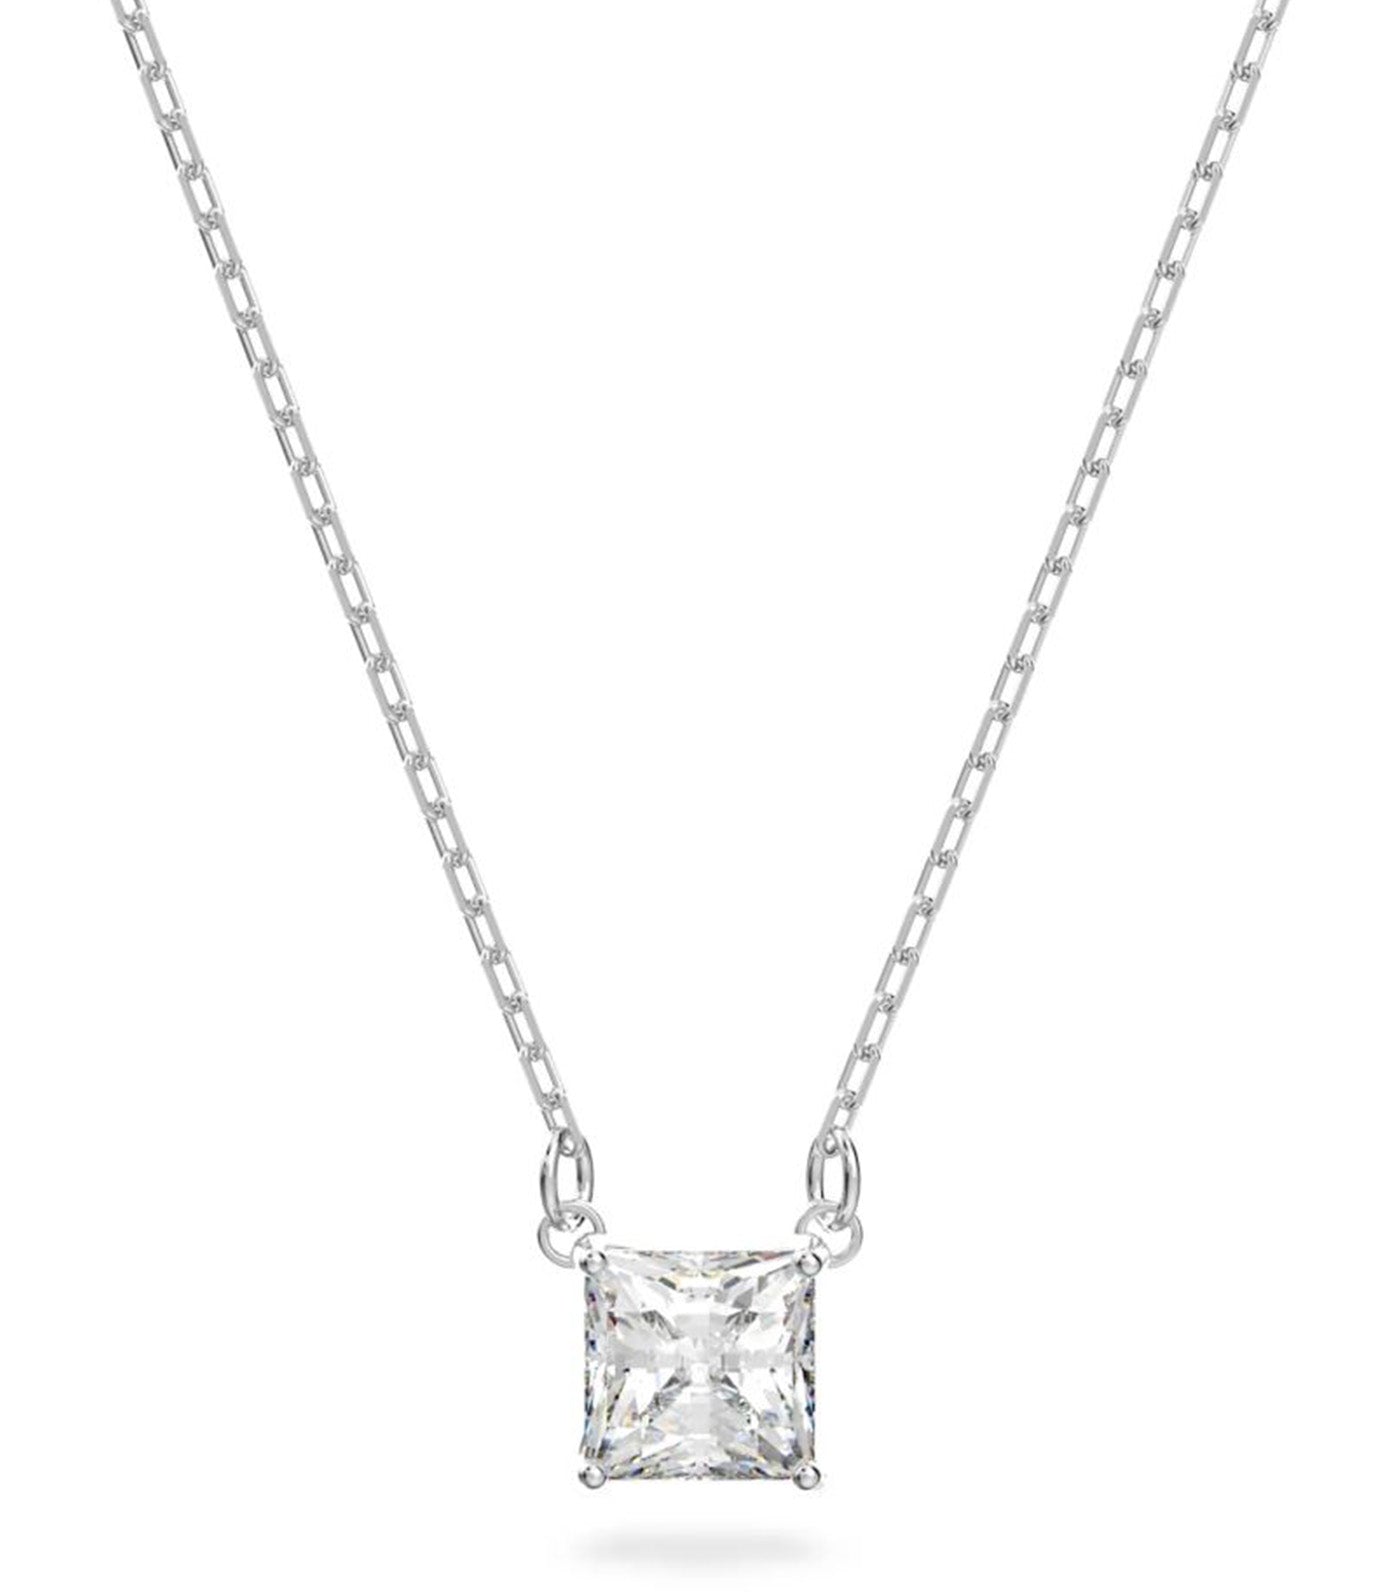 Attract Necklace Square Cut White Rhodium Plated